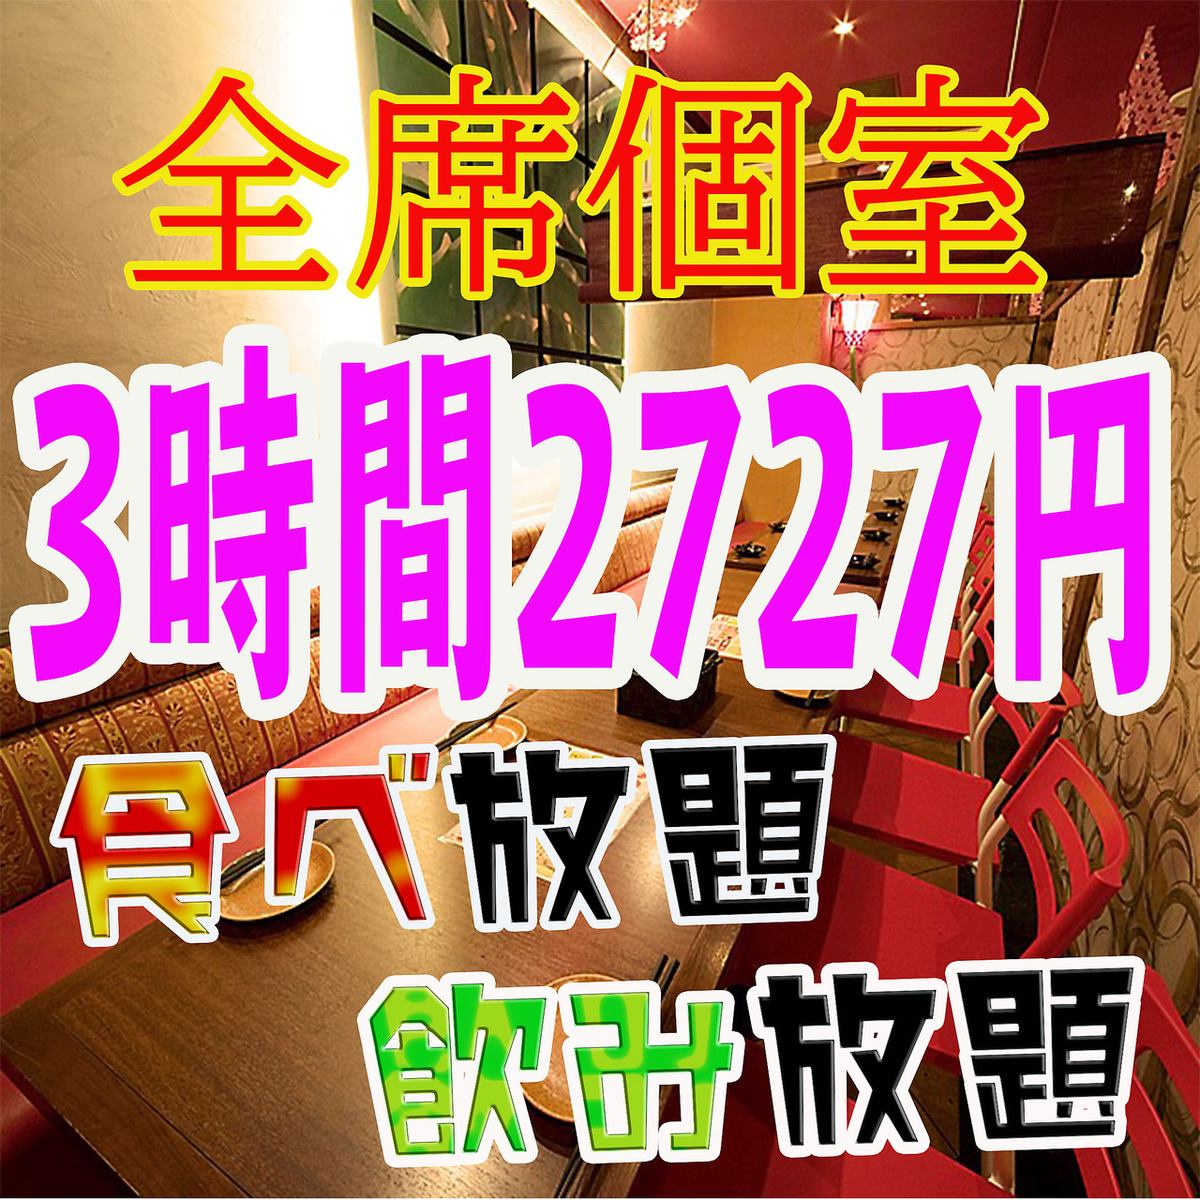 All-you-can-eat and drink for 3 hours! 2,727 yen ⇒ 2,222 yen!!